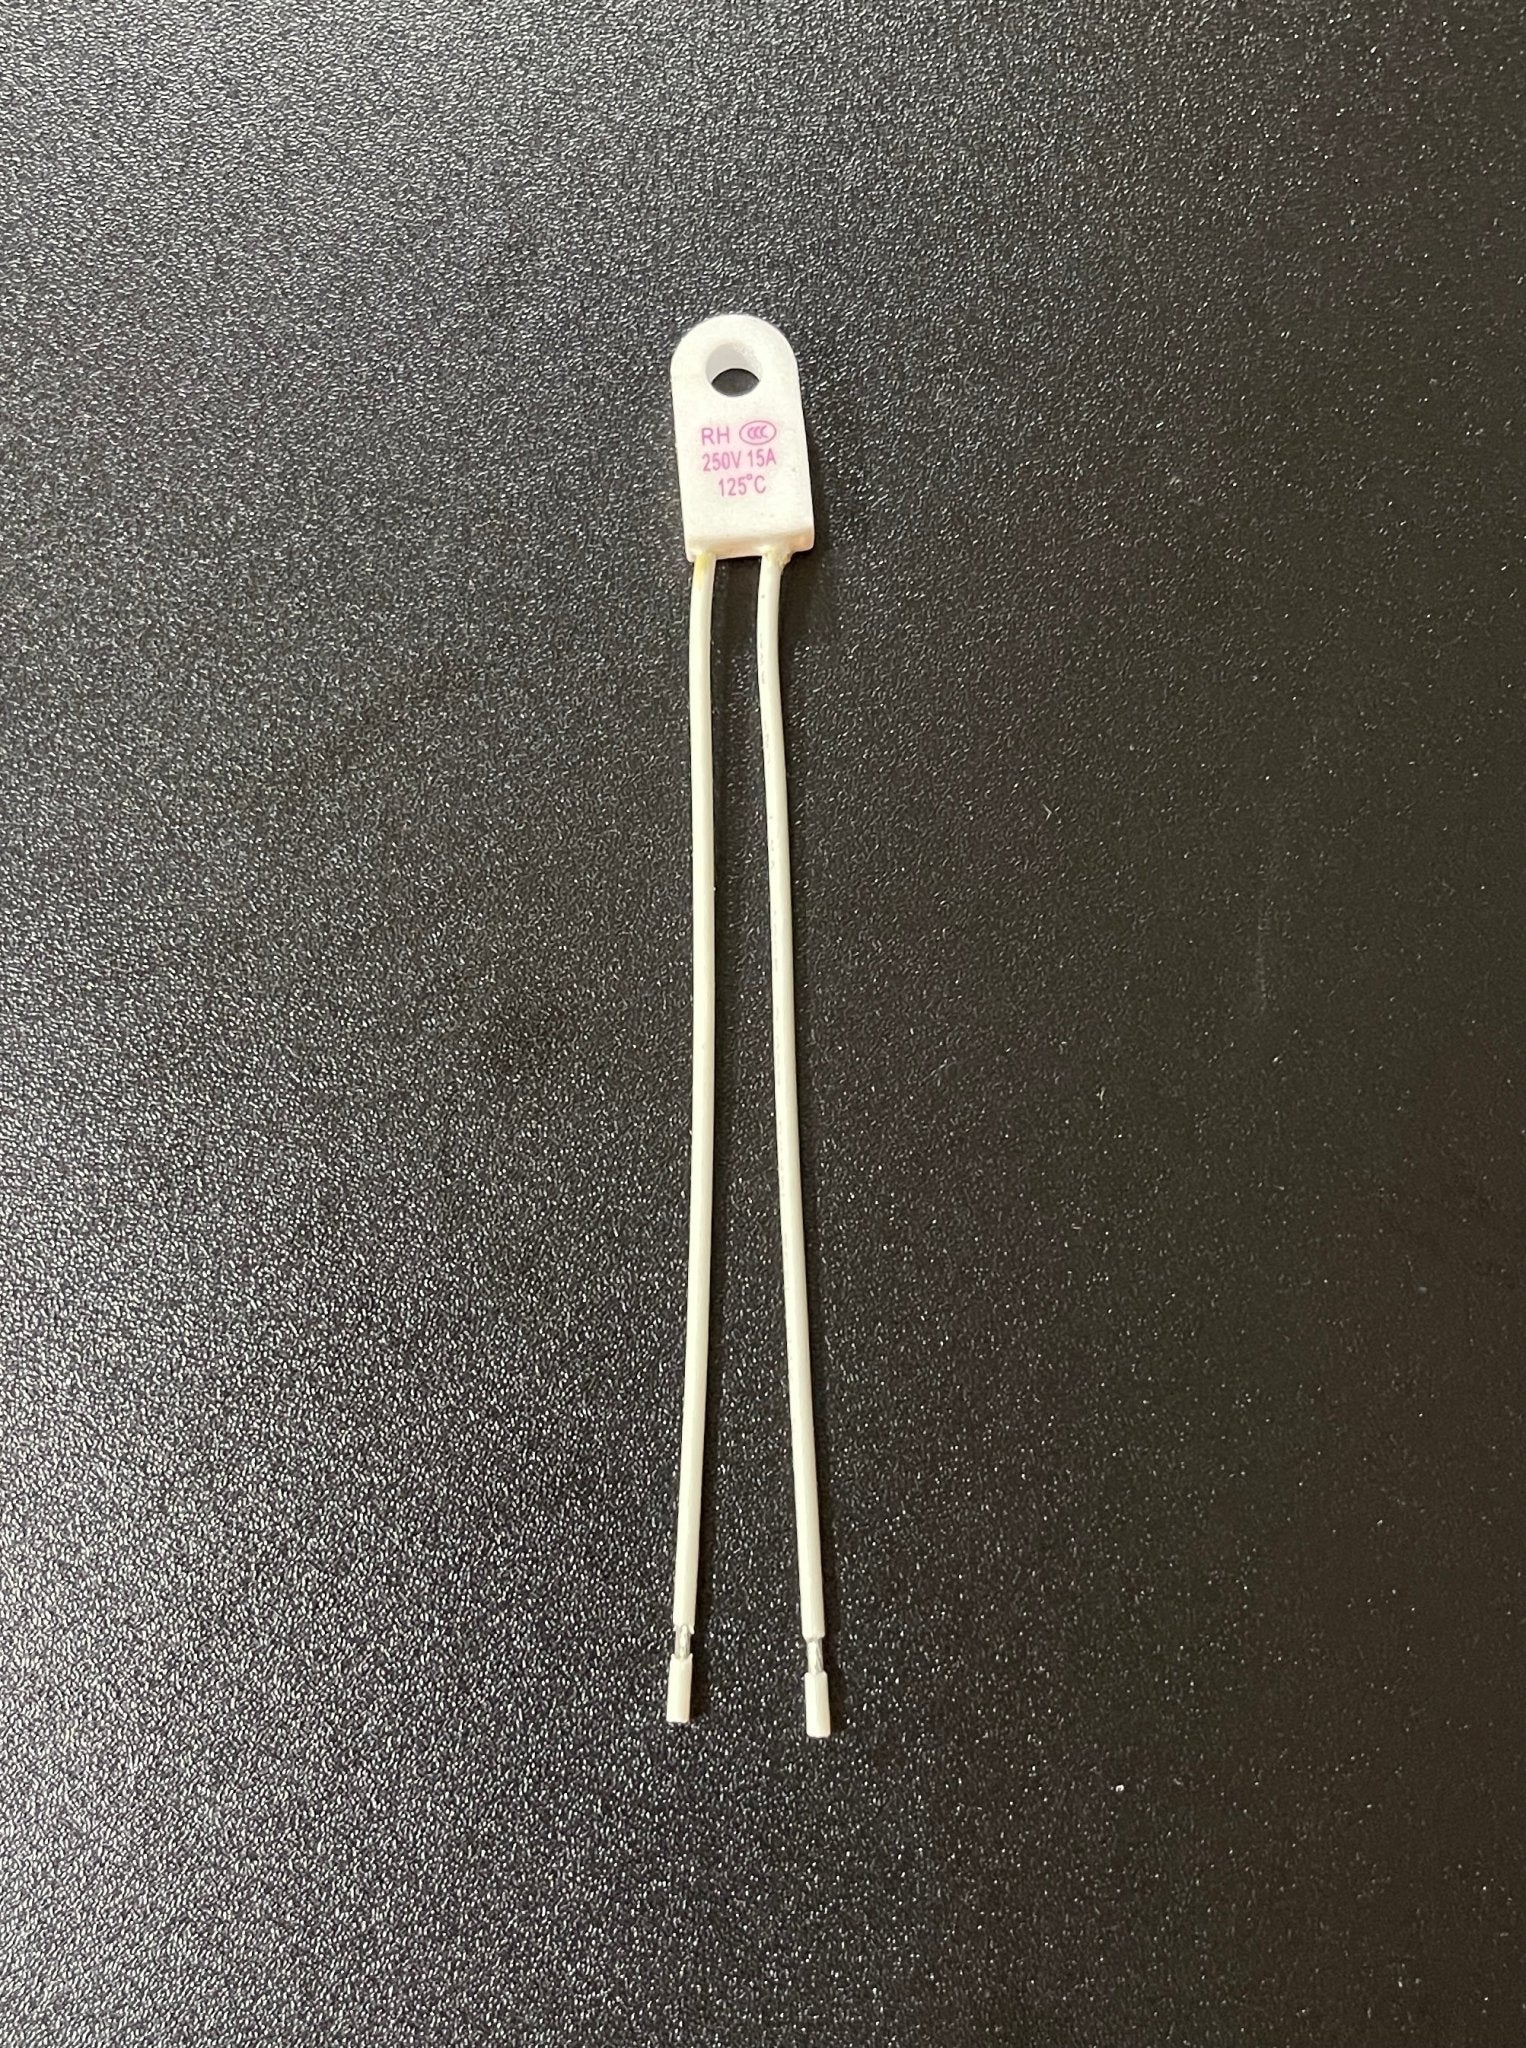 125C / 150C Cutoff 15A Thermal Fuse - West3D Printing - NA